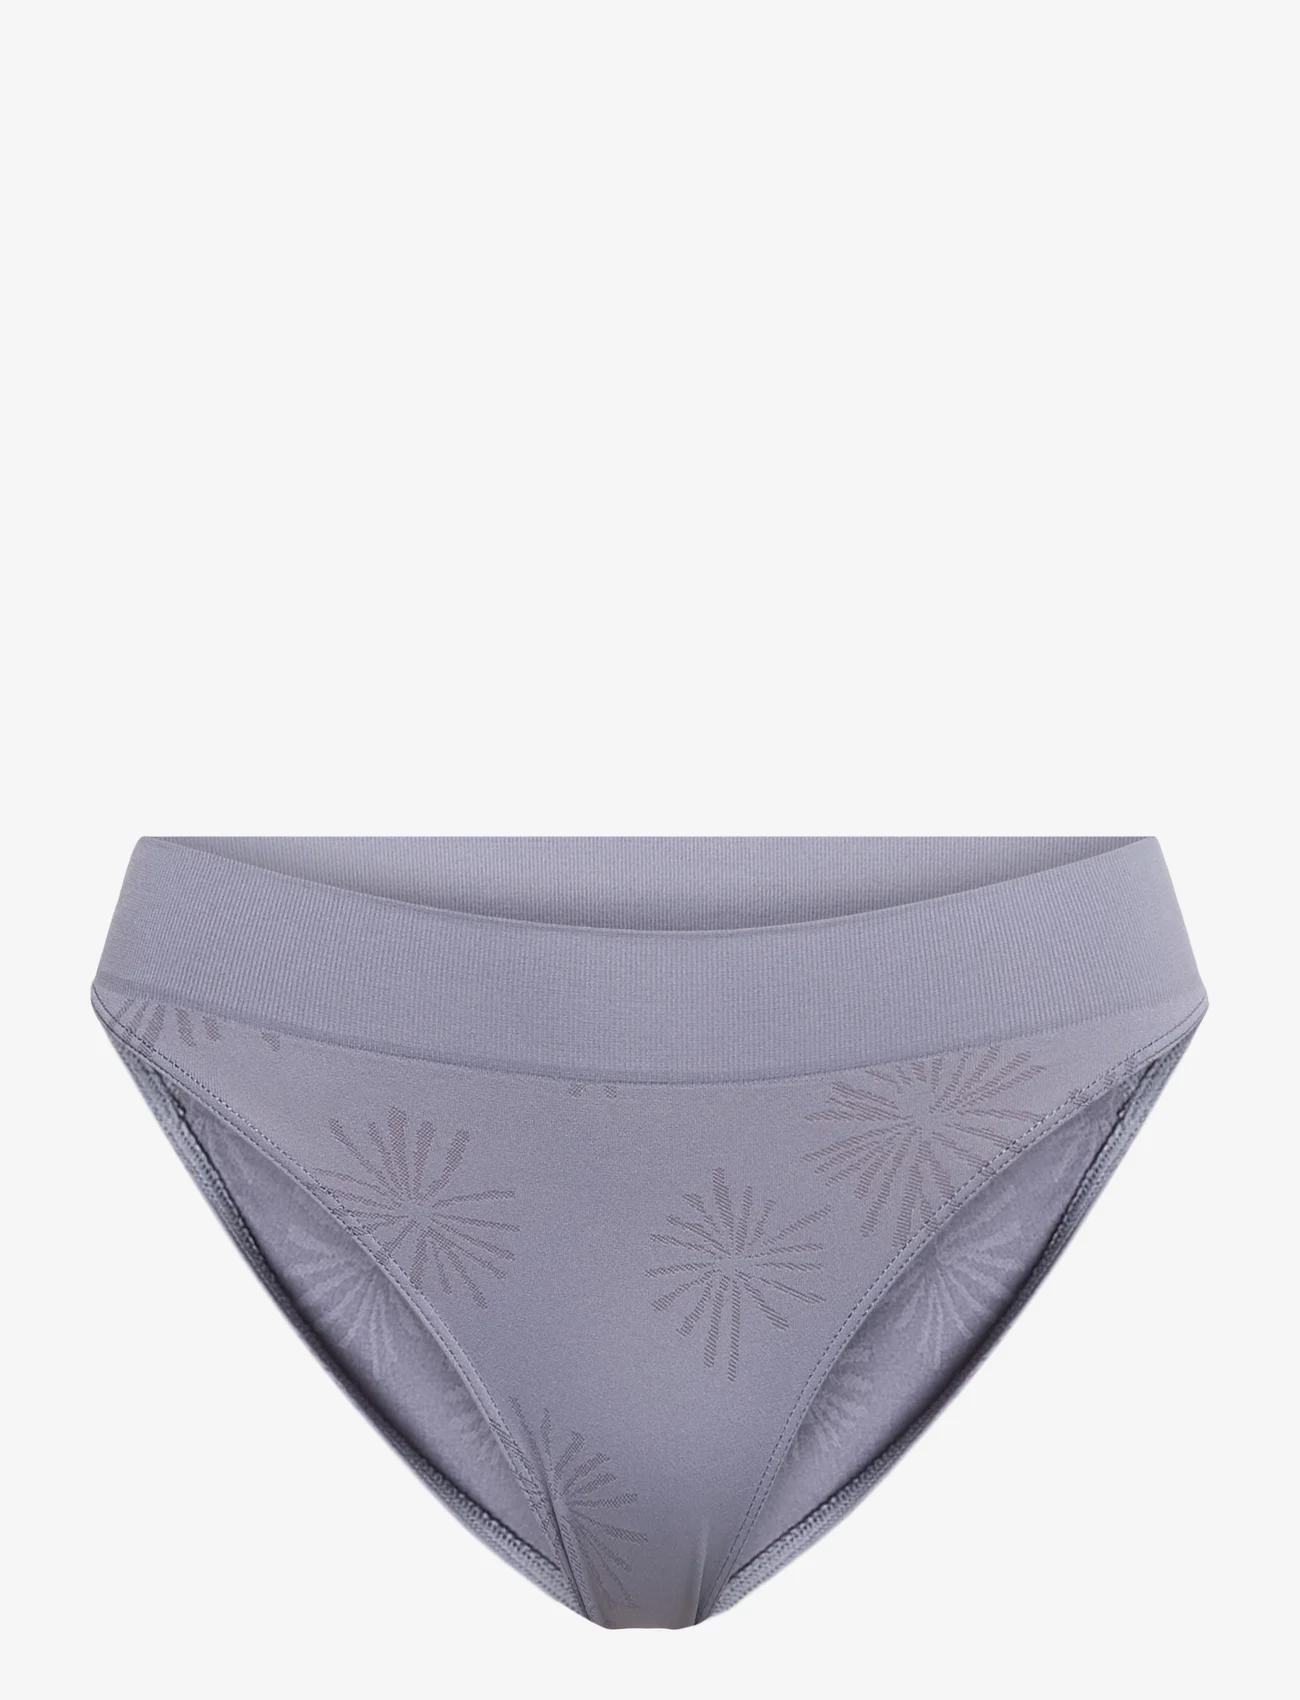 Esprit Bodywear Women - Recycled: soft, comfy hipster briefs - lowest prices - grey blue - 0